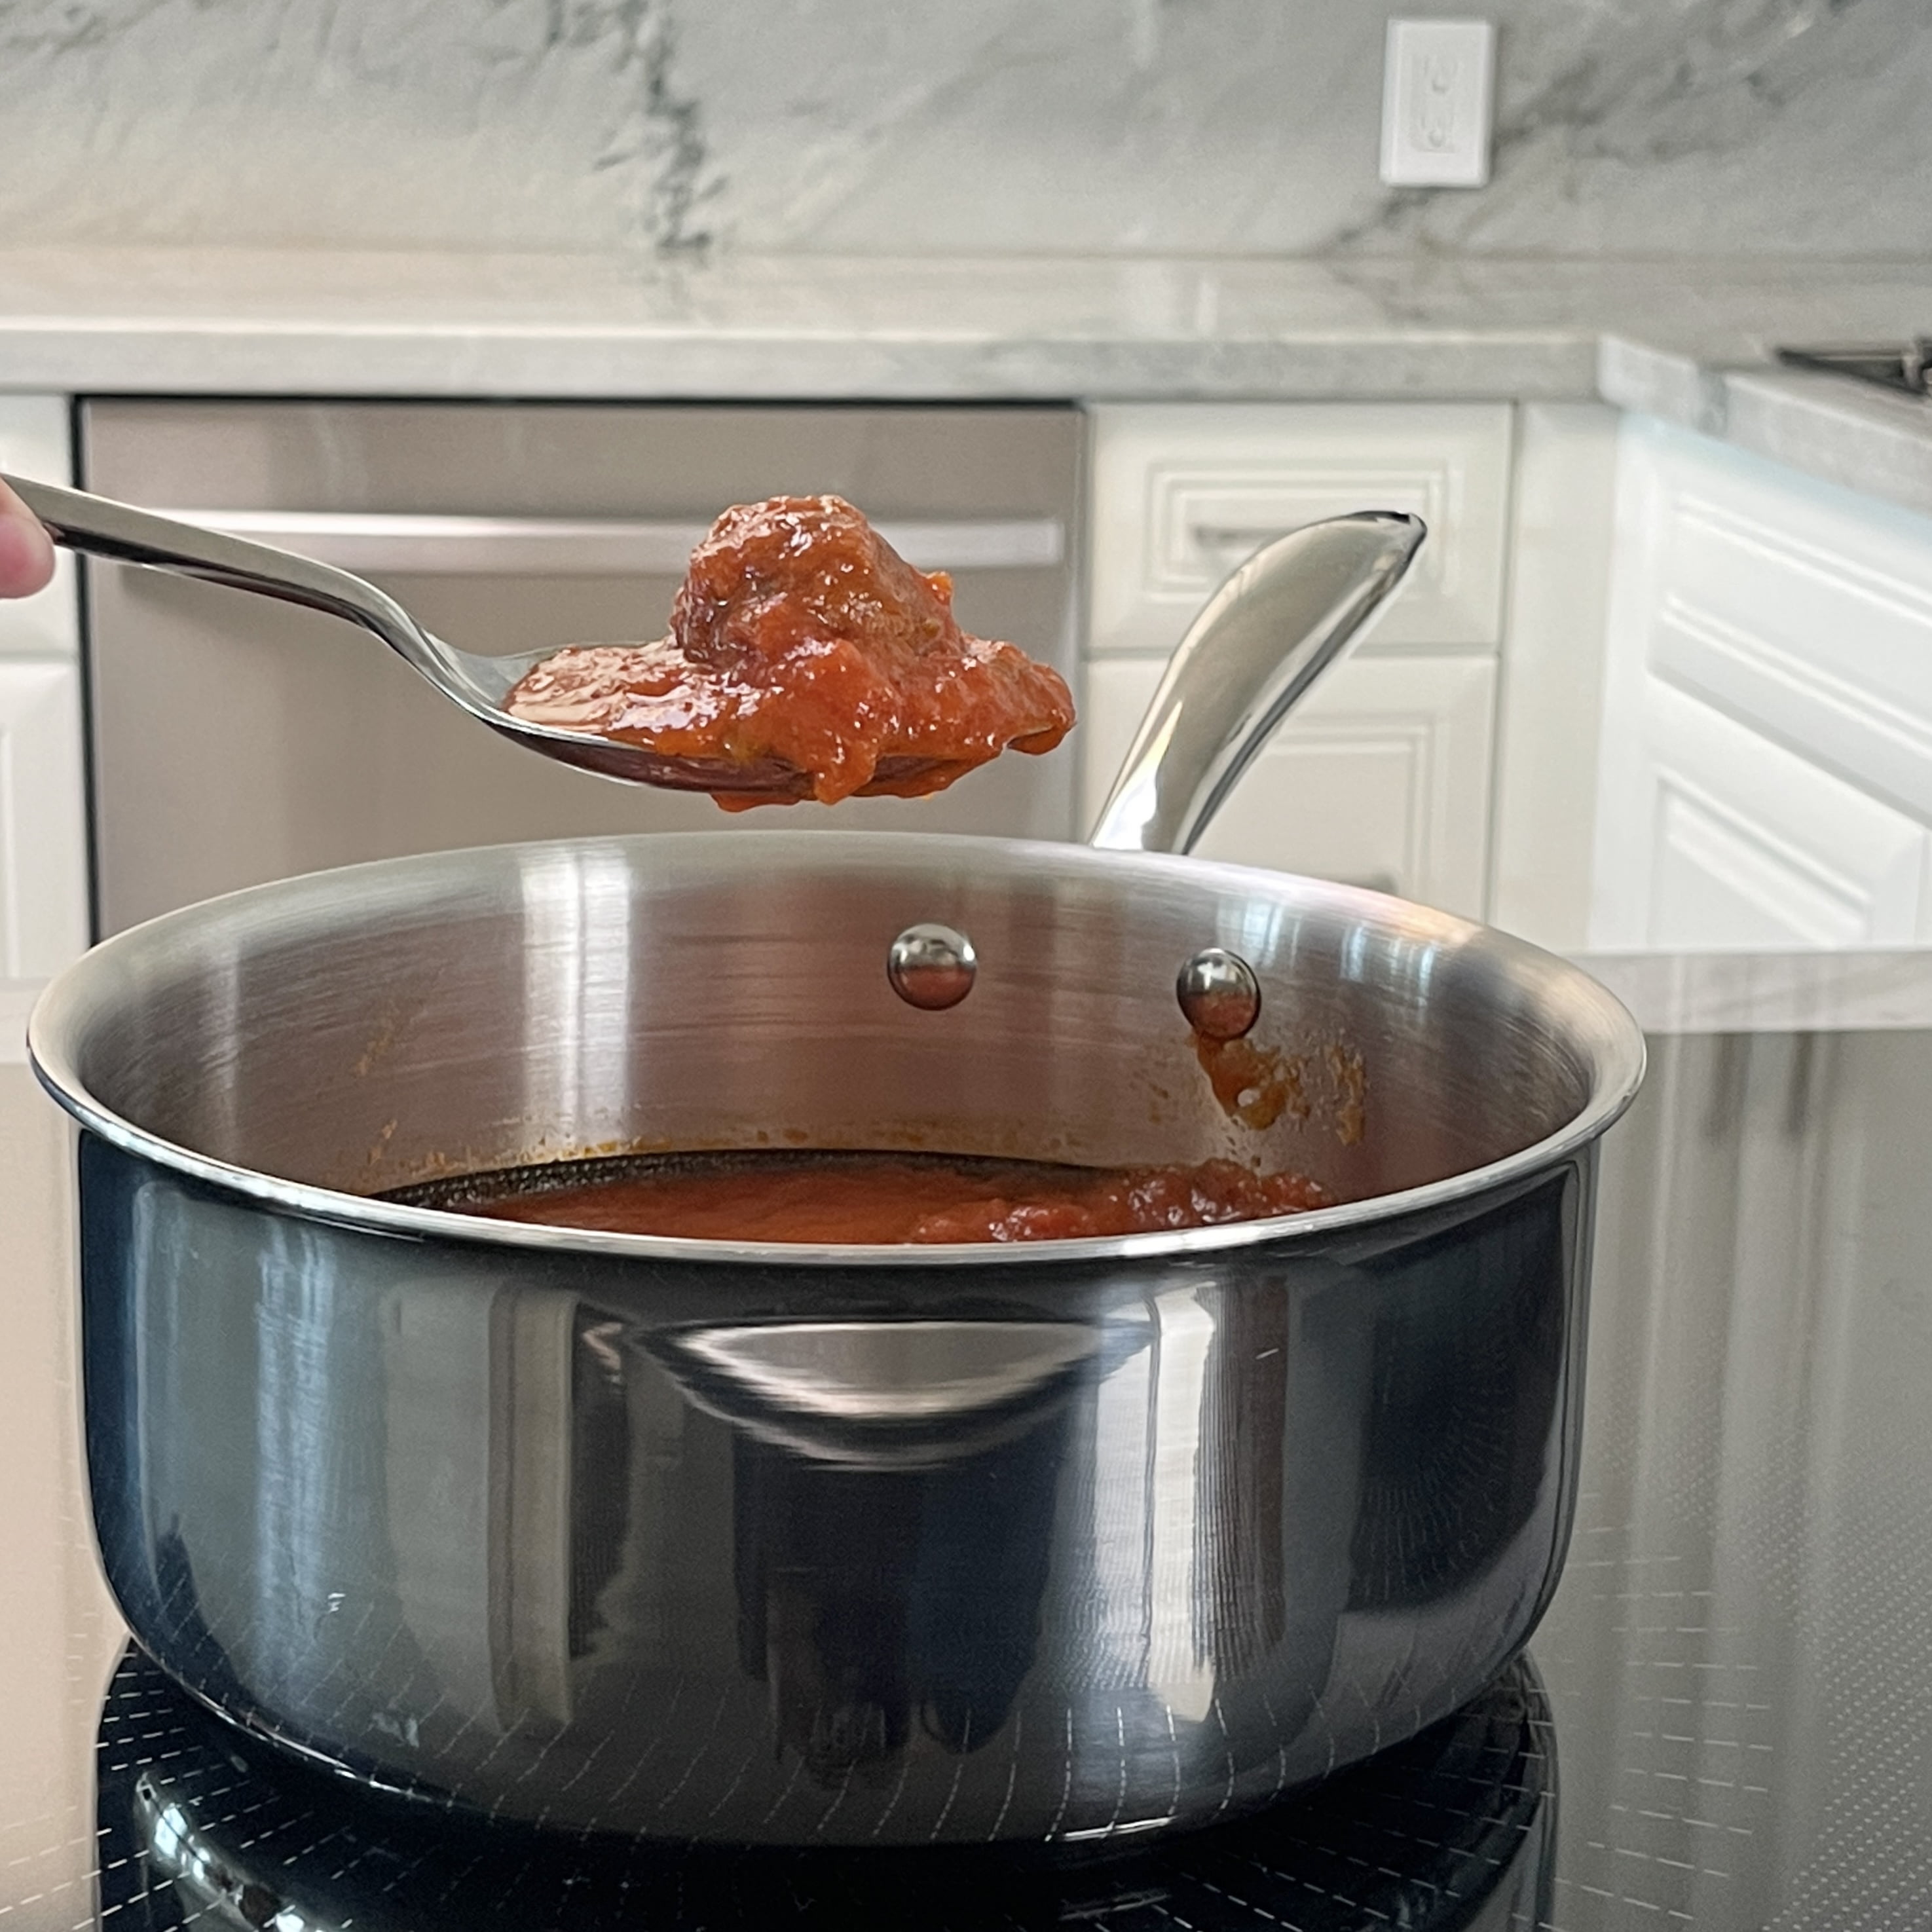 Our Top Picks for the Safest Cookware - Lexi's Clean Kitchen